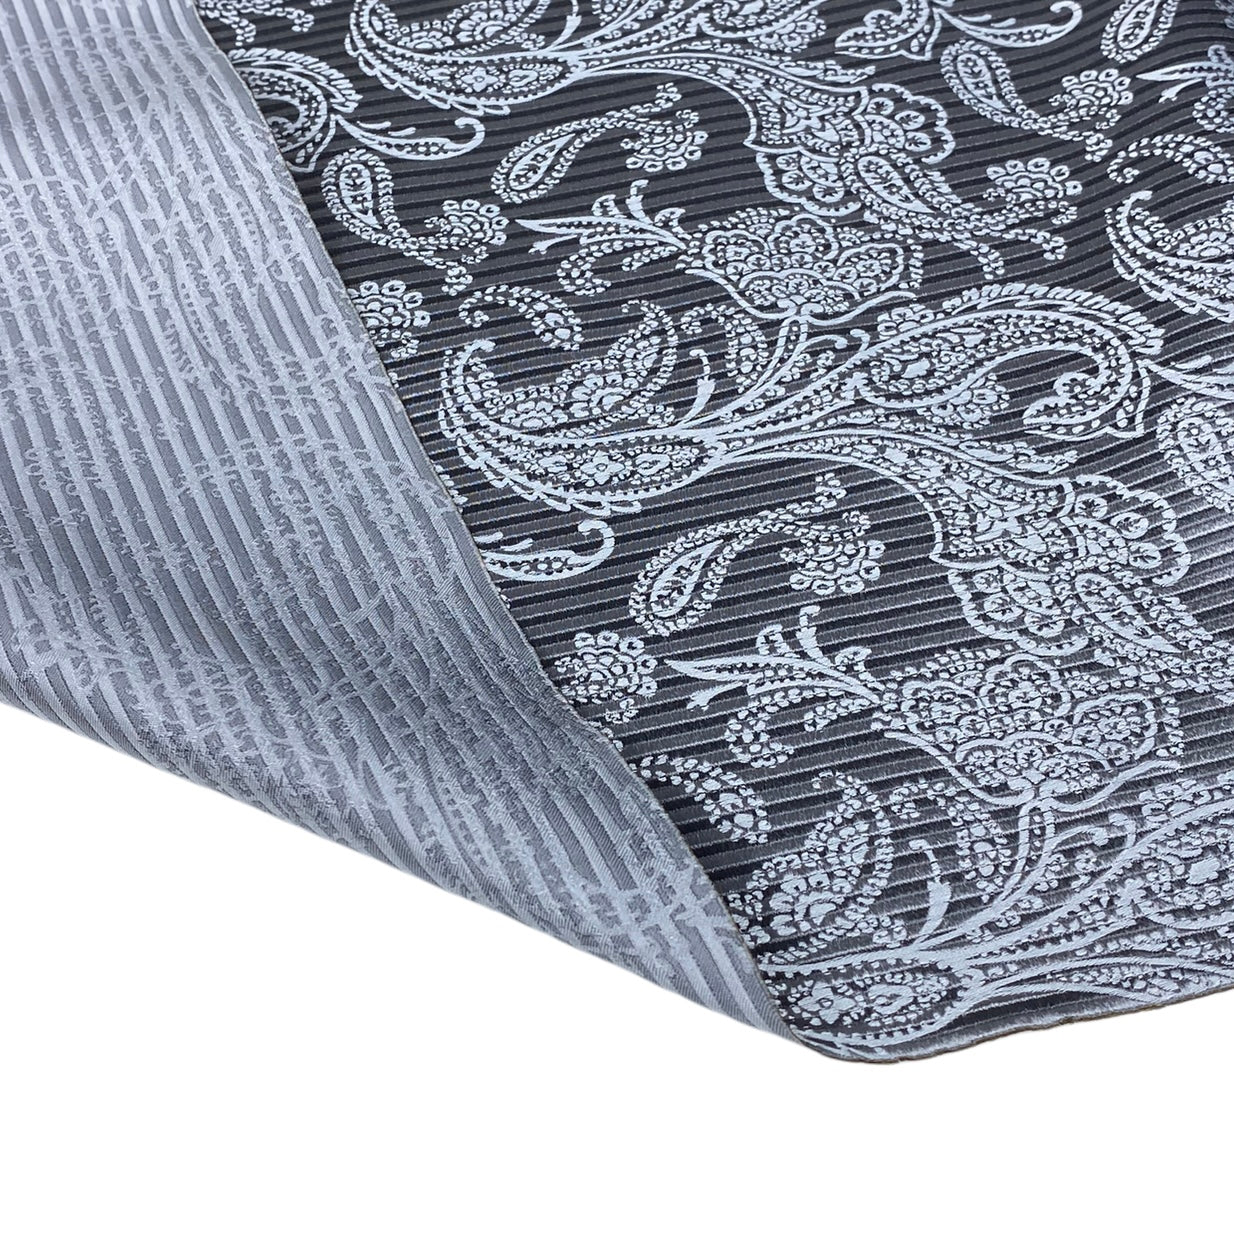 Striped Paisley Silk/Polyester Jacquard - Grey / White - Remnant